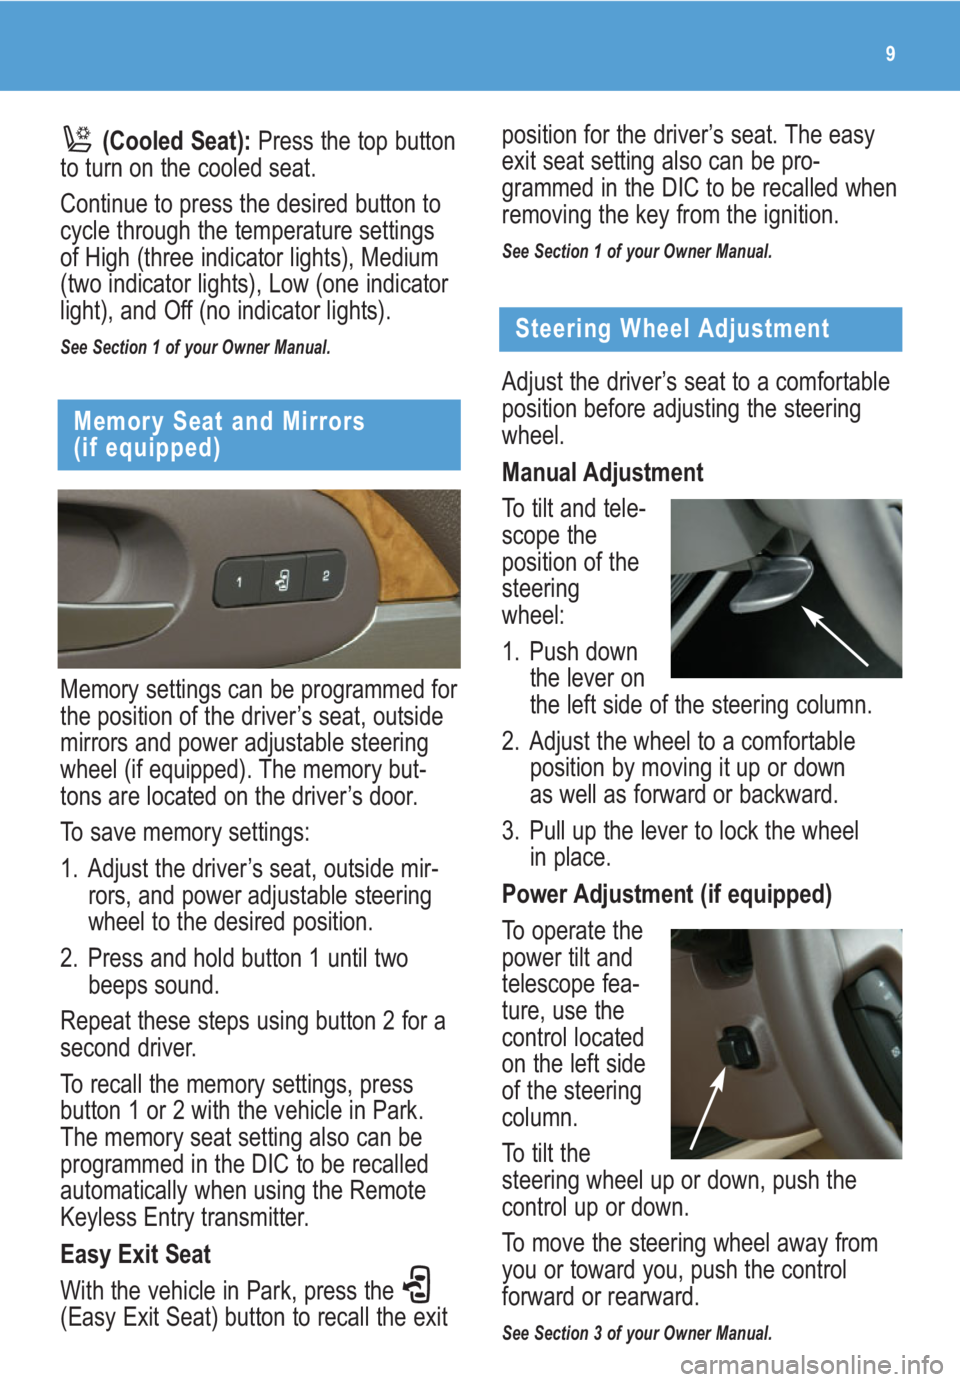 BUICK ENCLAVE 2009  Get To Know Guide 9
Memory settings can be programmed for
the position of the driver’s seat, outside
mirrors and power adjustable steering
wheel (if equipped). The memory but-
tons are located on the driver’s door.